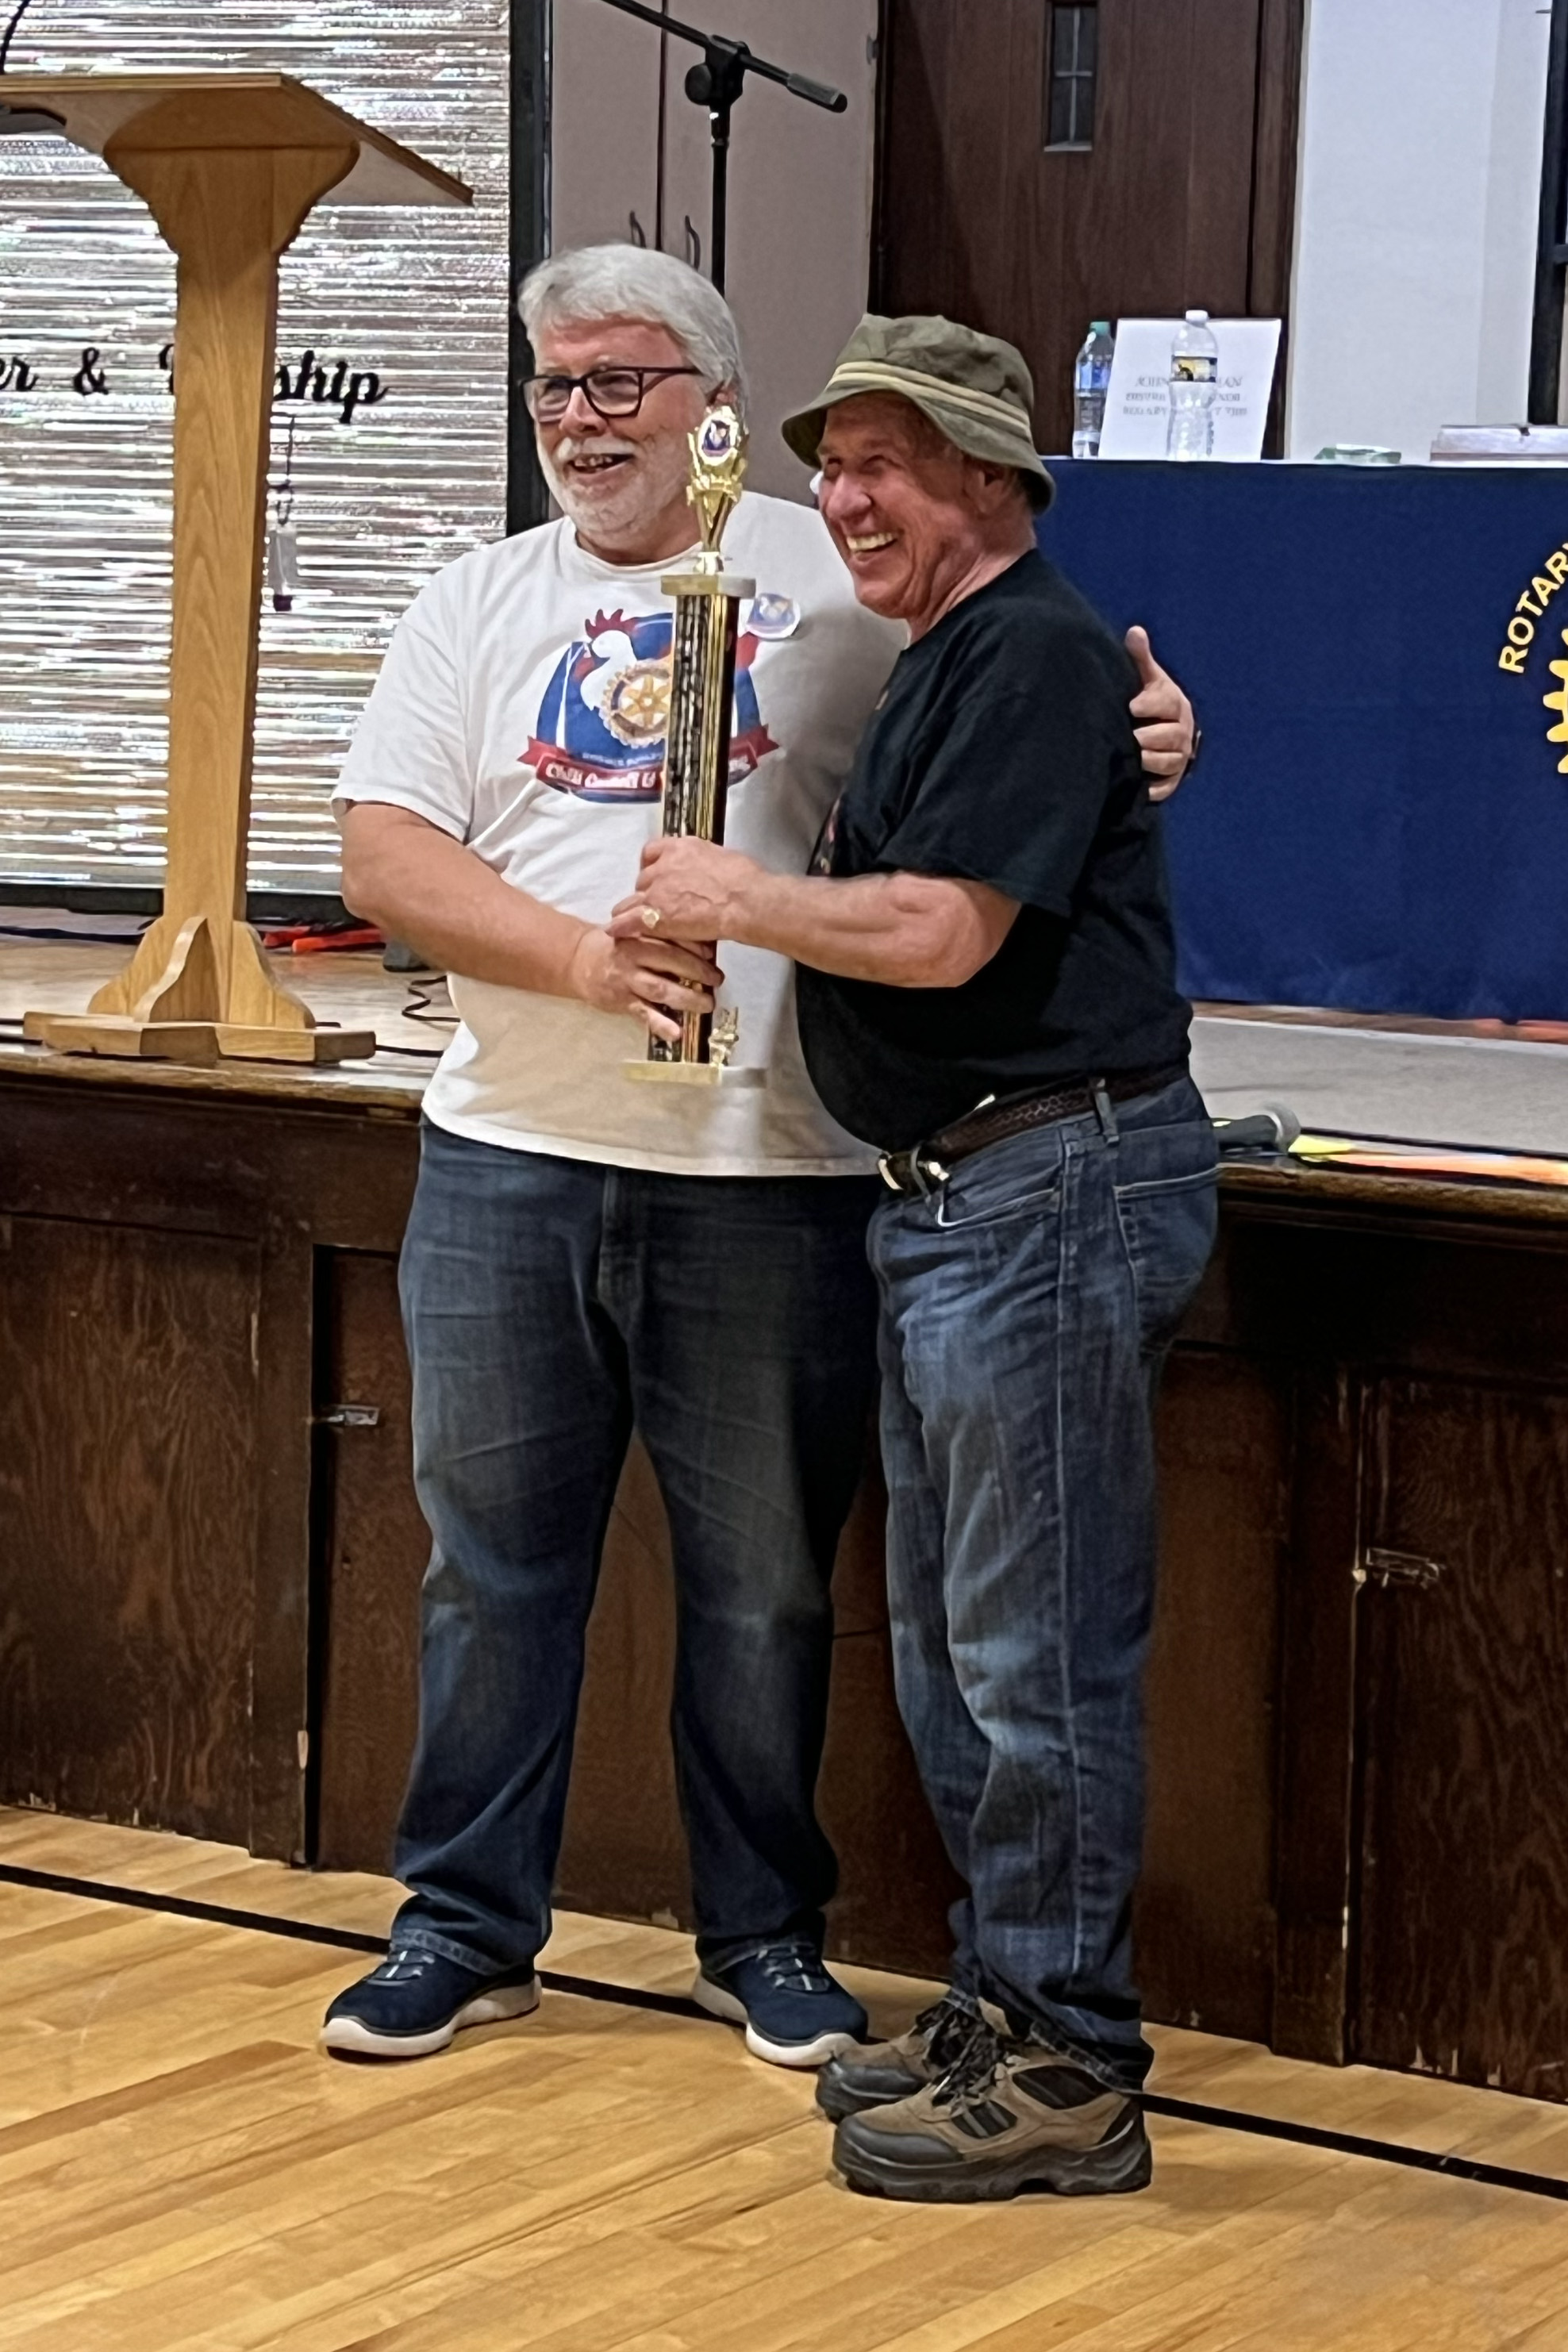 Pictured are Mr. Rich Siniawski and Mr. William F. Caruthers II, as they accept the award for best presentation at the Norwin Rotary Chili Cookoff & Wing Thing.